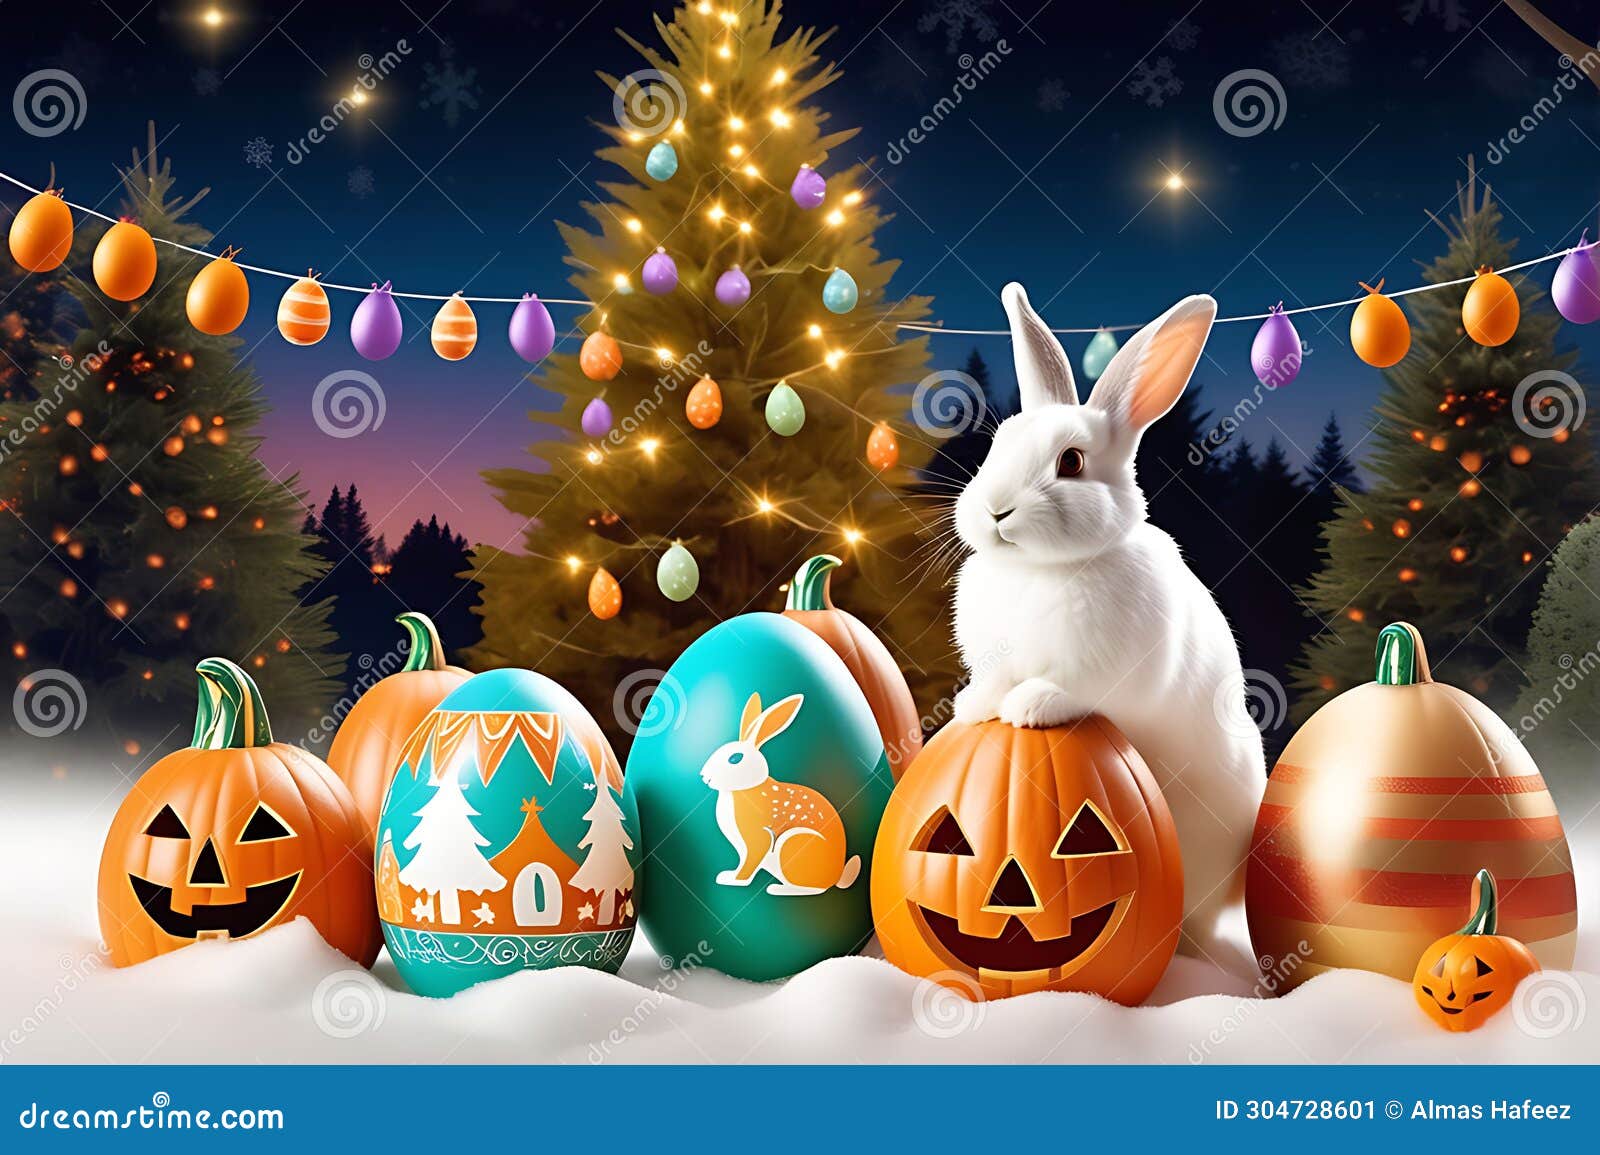 whimsical juxtaposition: rabbit in easter attire surrounded by pastel eggs in a playful composite image